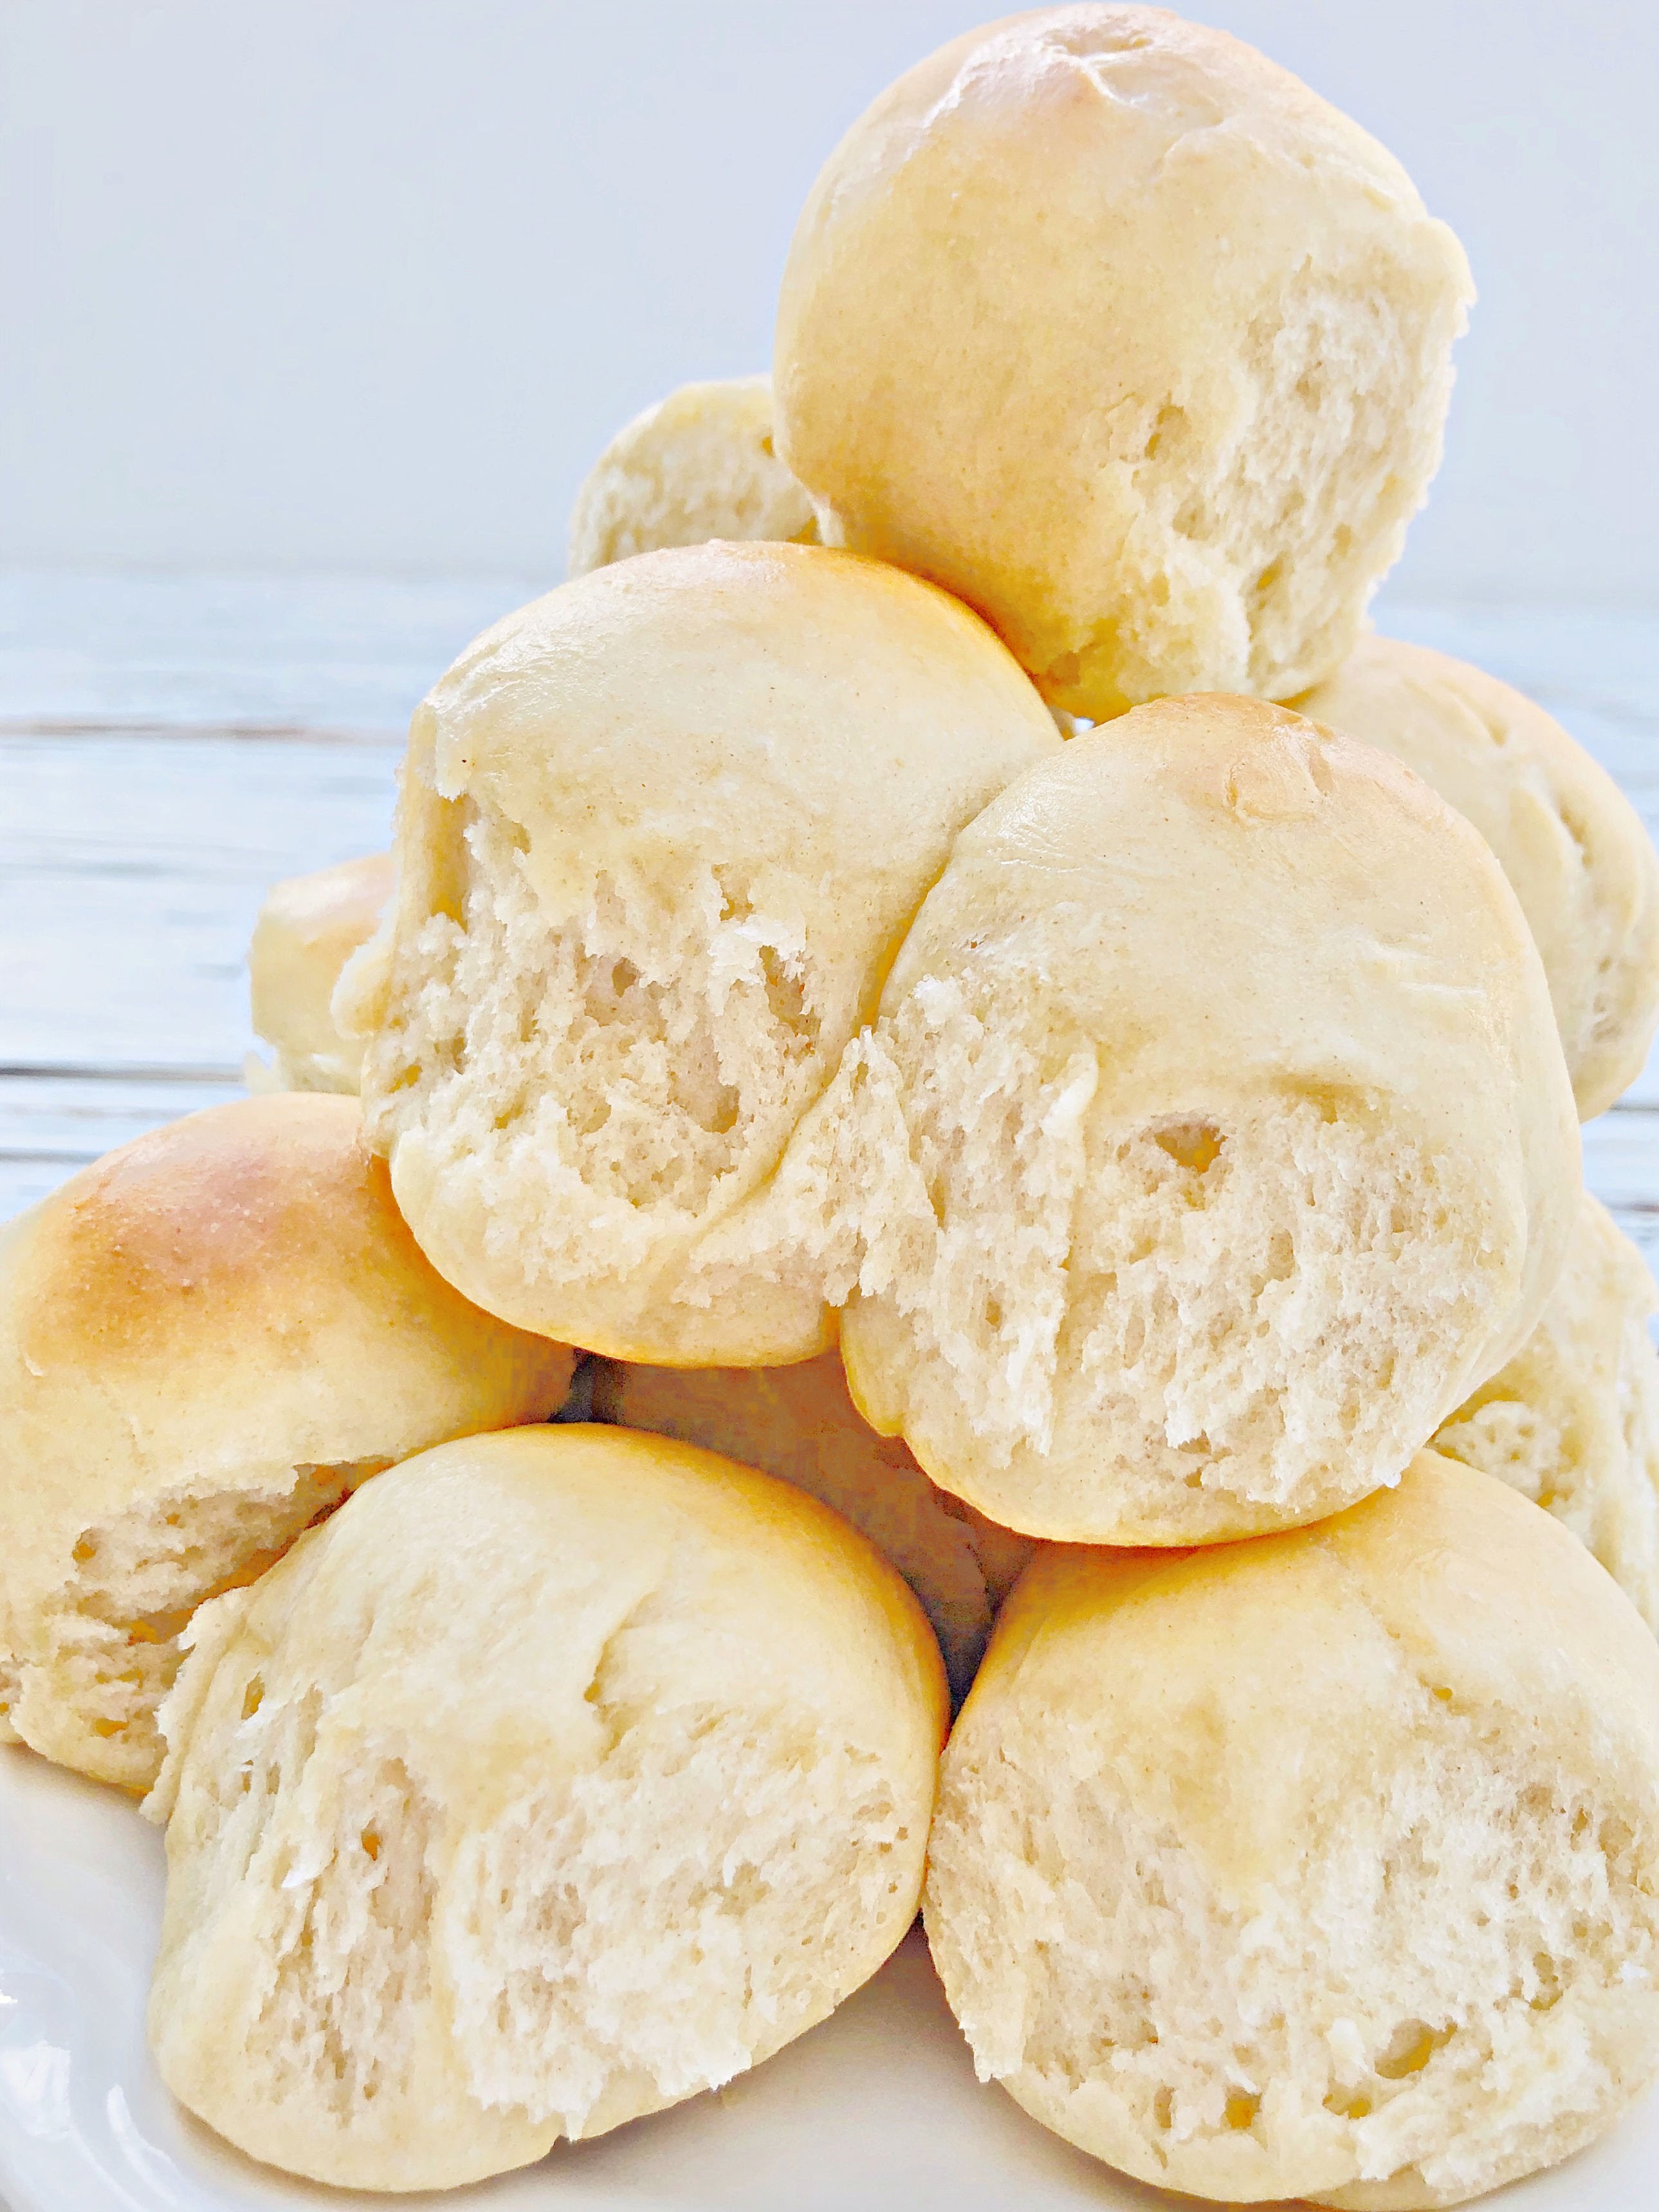 Easy Vegan Pull-Apart Dinner Rolls - Impress your guests with soft and fluffy homemade dinner rolls! Perfect for the holiday dinner table! | thiswifecooks.com

#thanksgivingbreadrollrecipe #yeastrolls #dairyfreedinnerrolls #veganthanksgivingrecipes #thiswifecooksrecipes

 via @thiswifecooks